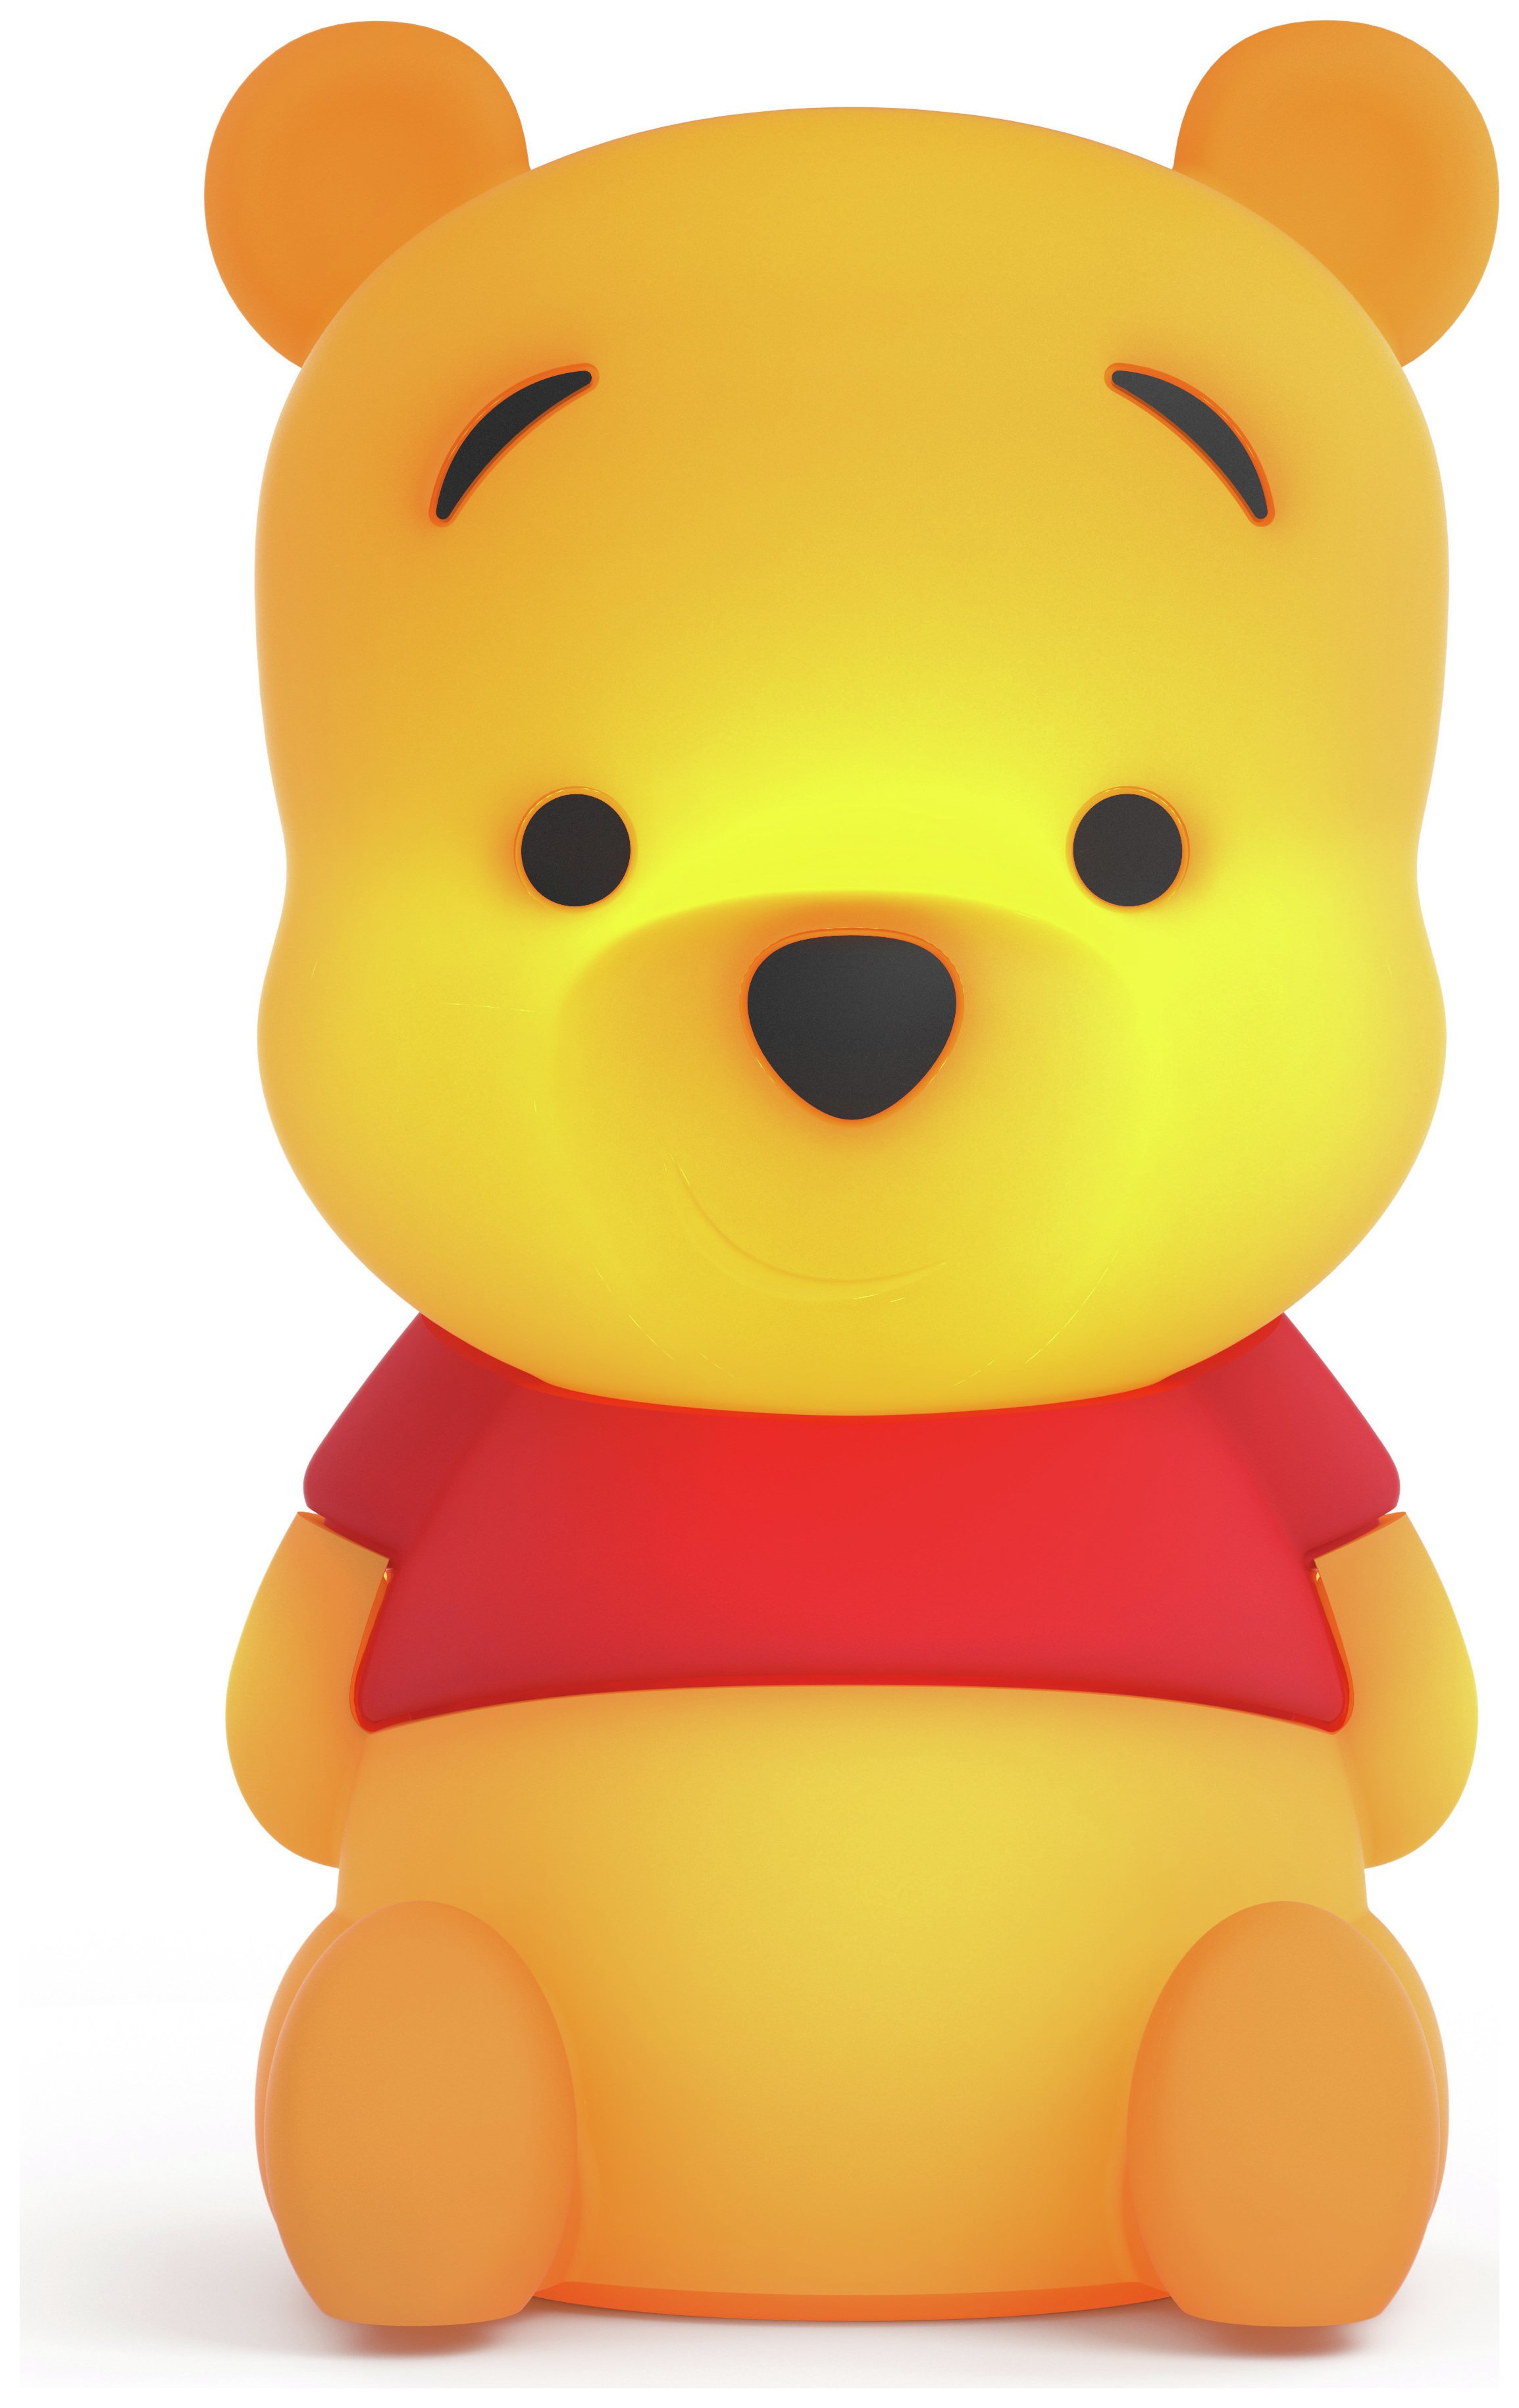 Softpals - Winnie the Pooh - LED Night Light -USB Charge Review